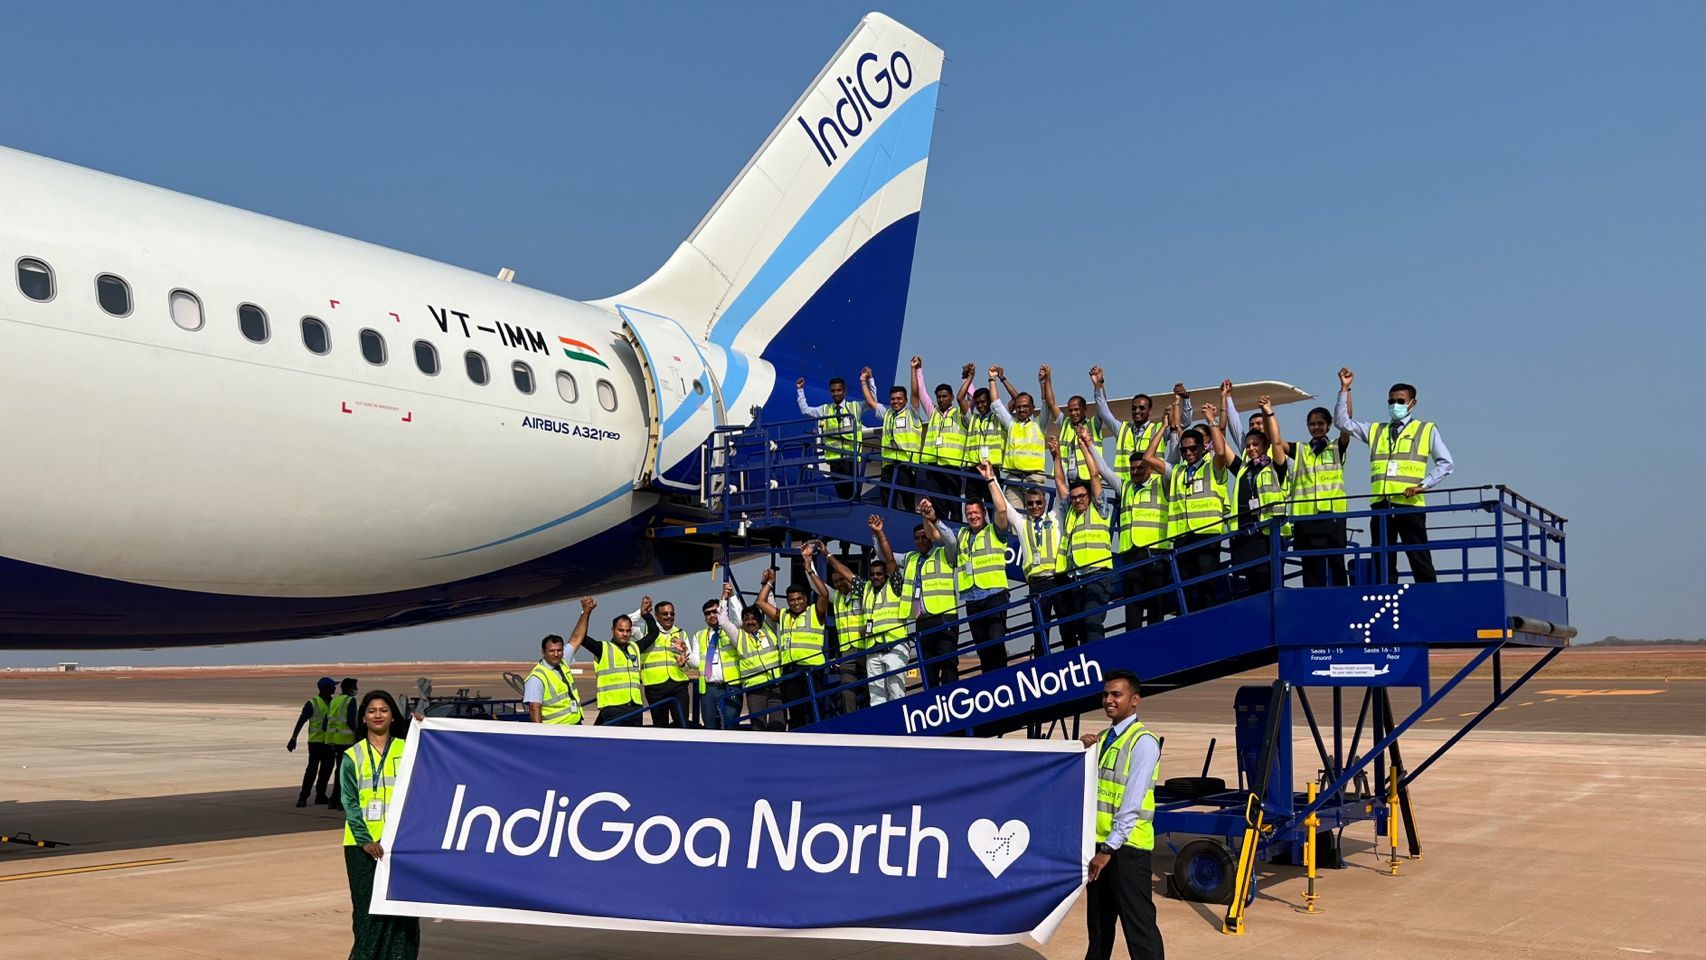 IndiGo first New Goa route and flights